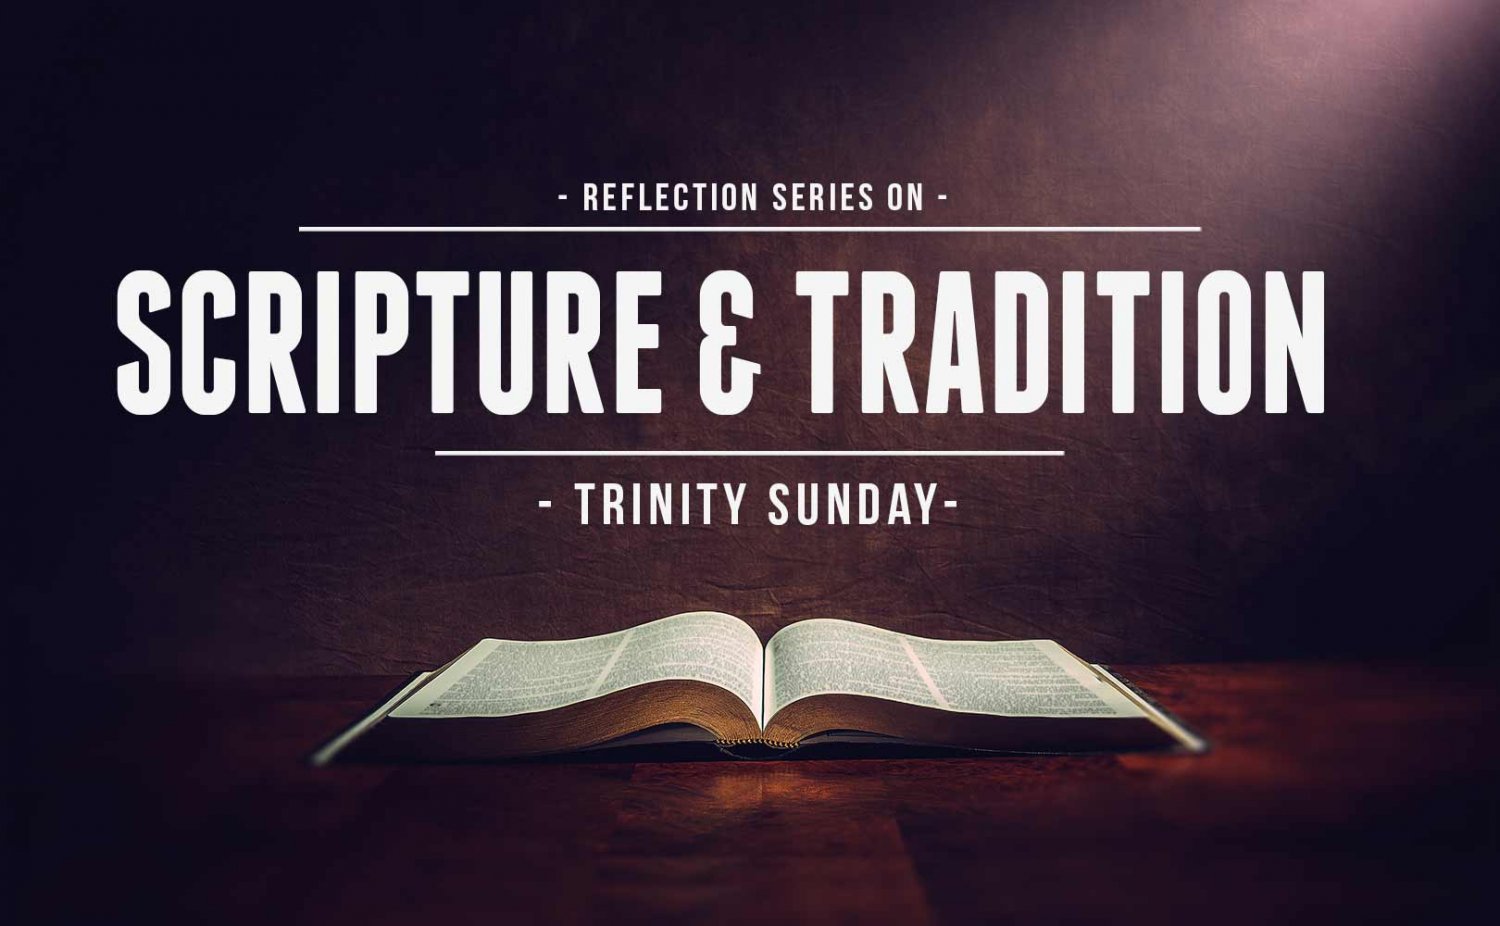 Scripture & Tradition Trinity Sunday OnePeterFive